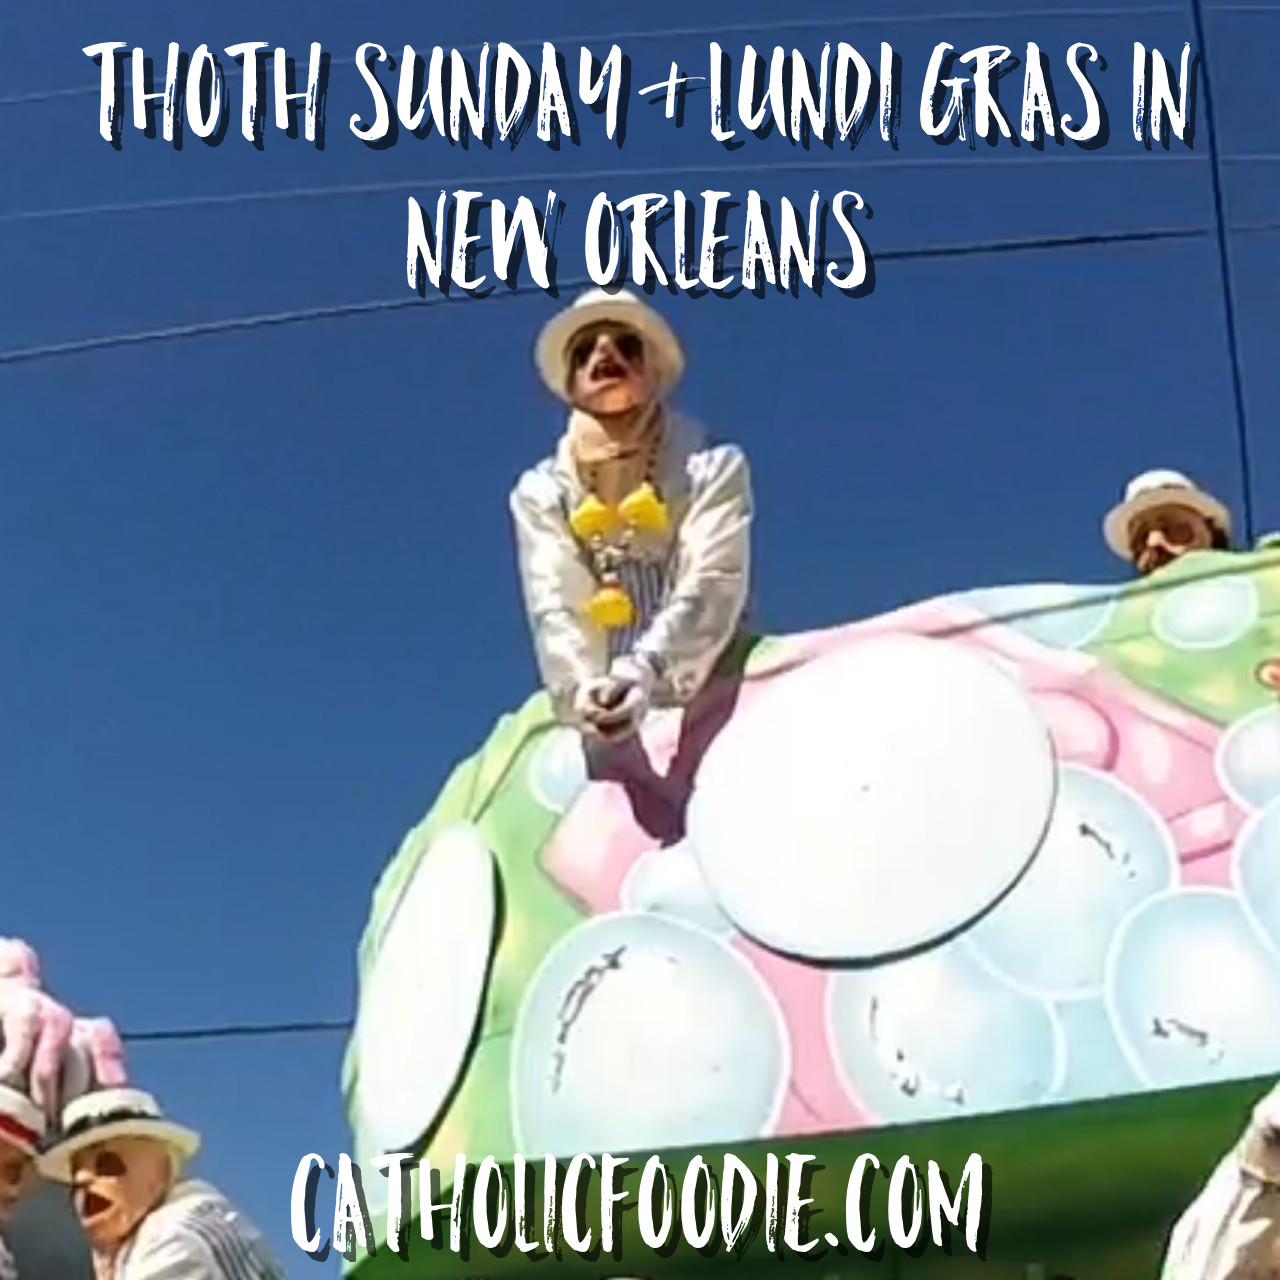 Thoth Sunday and Lundi Gras in New Orleans